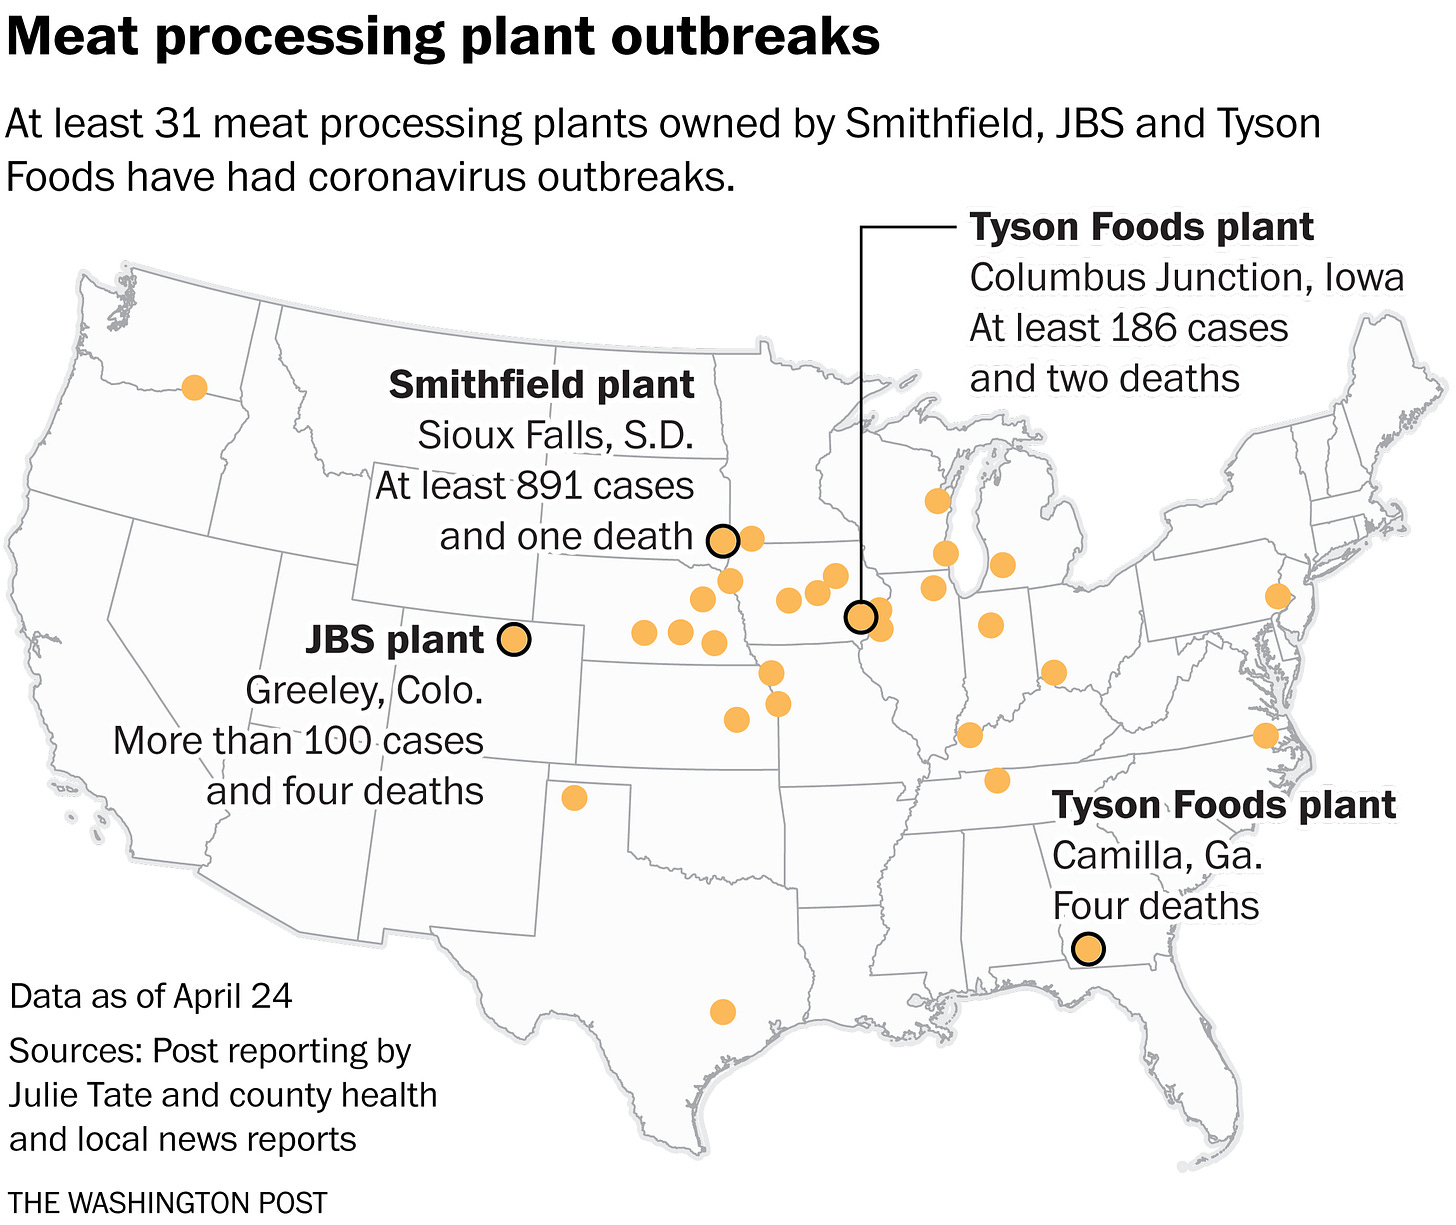 Inside Smithfield, JBS and Tysons Food meat plants, fears grew of employees  working sick, without protective gear - The Washington Post